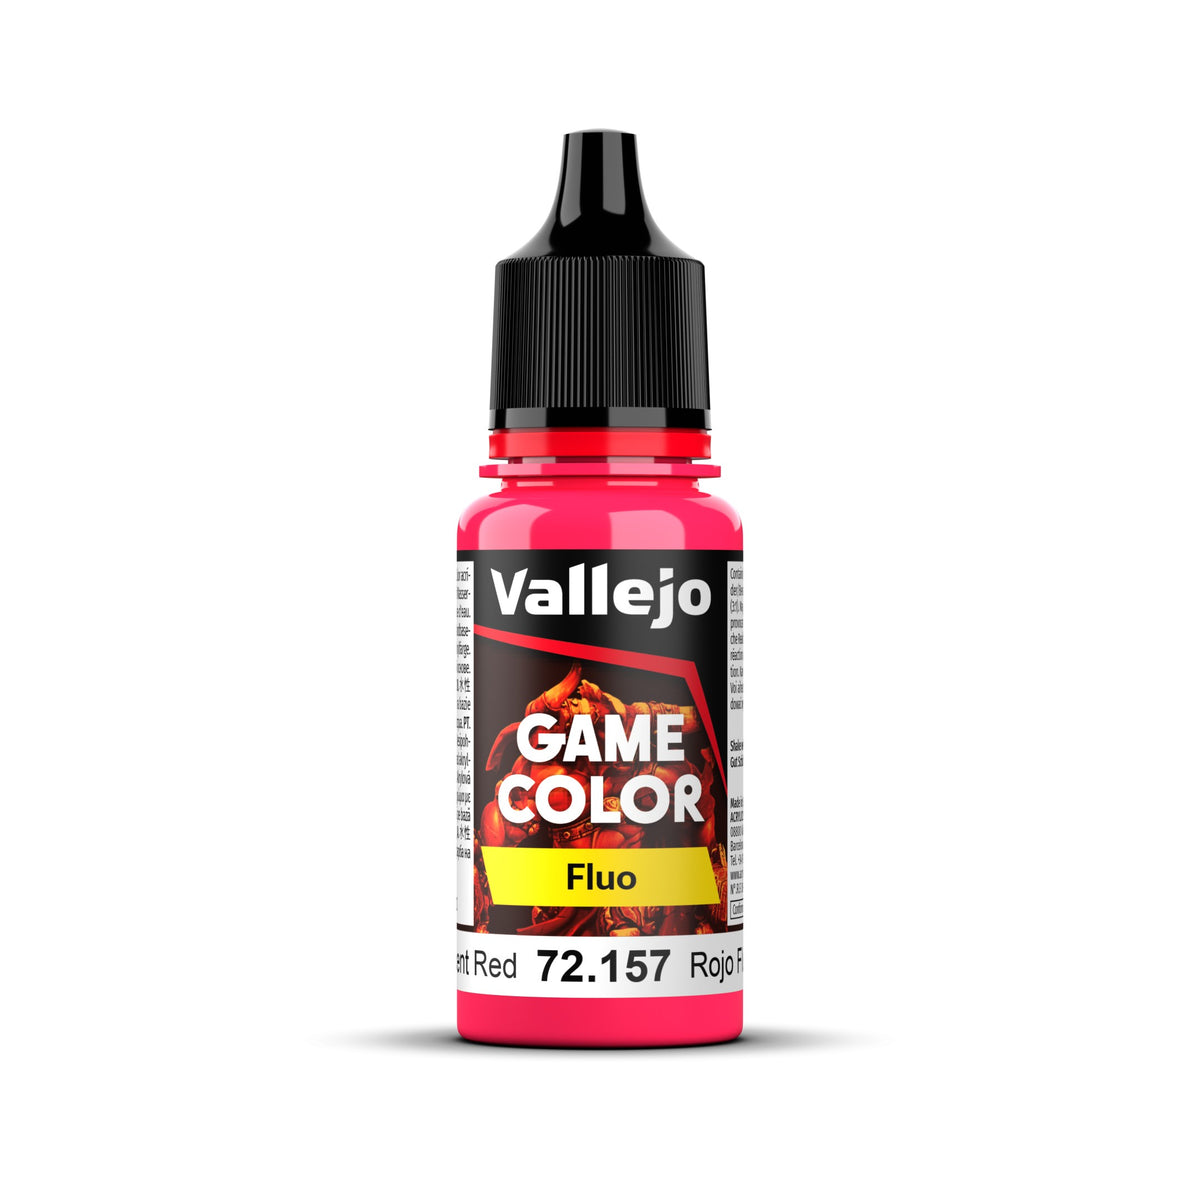 Vallejo Game Colour Fluorescent Red 18ml